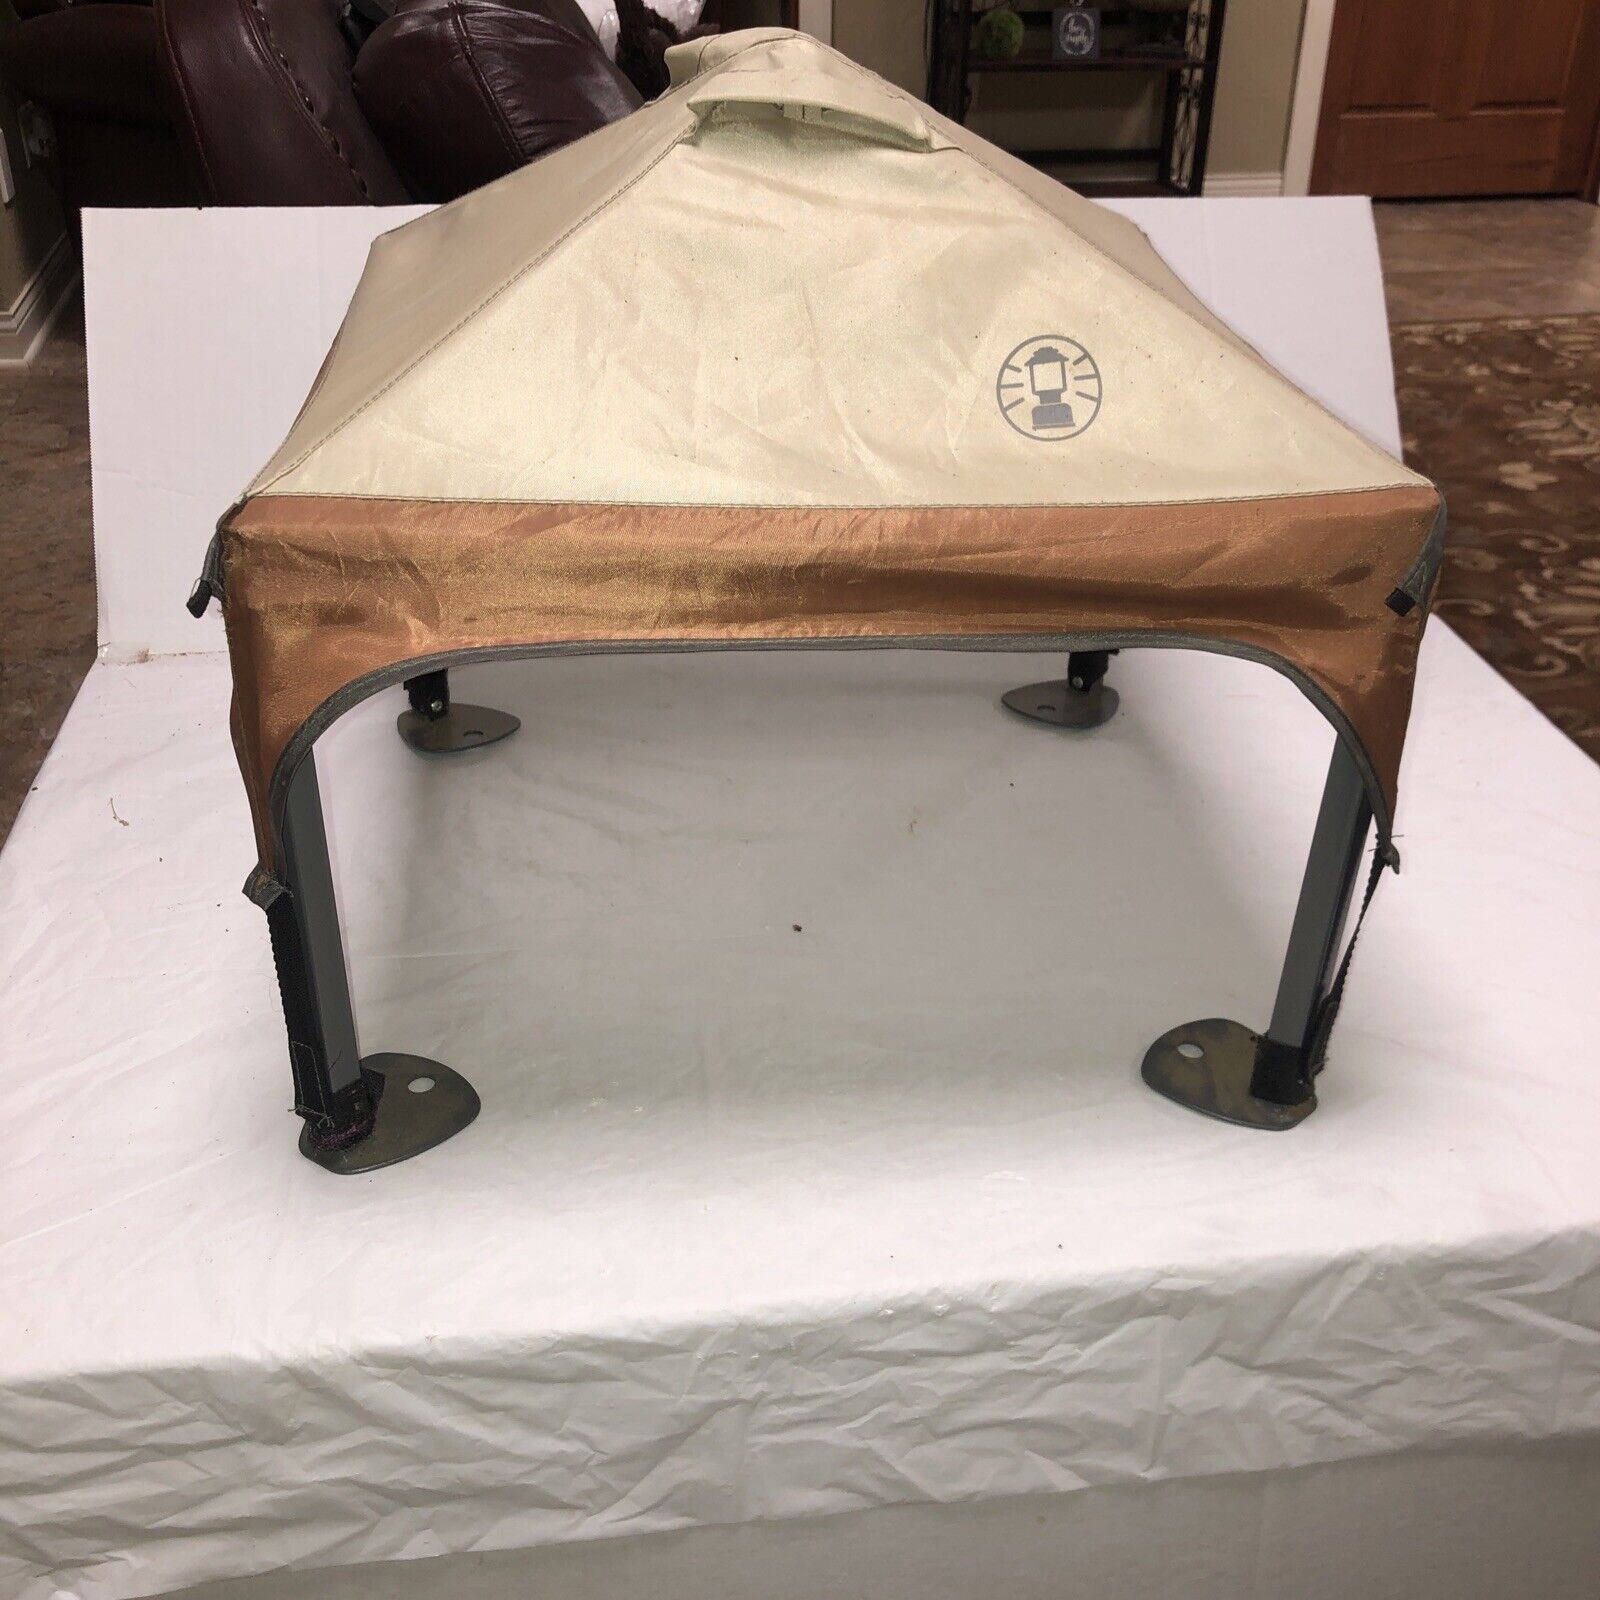 Coleman Store Display Tent Tan-Brown Excellent Condition Rare